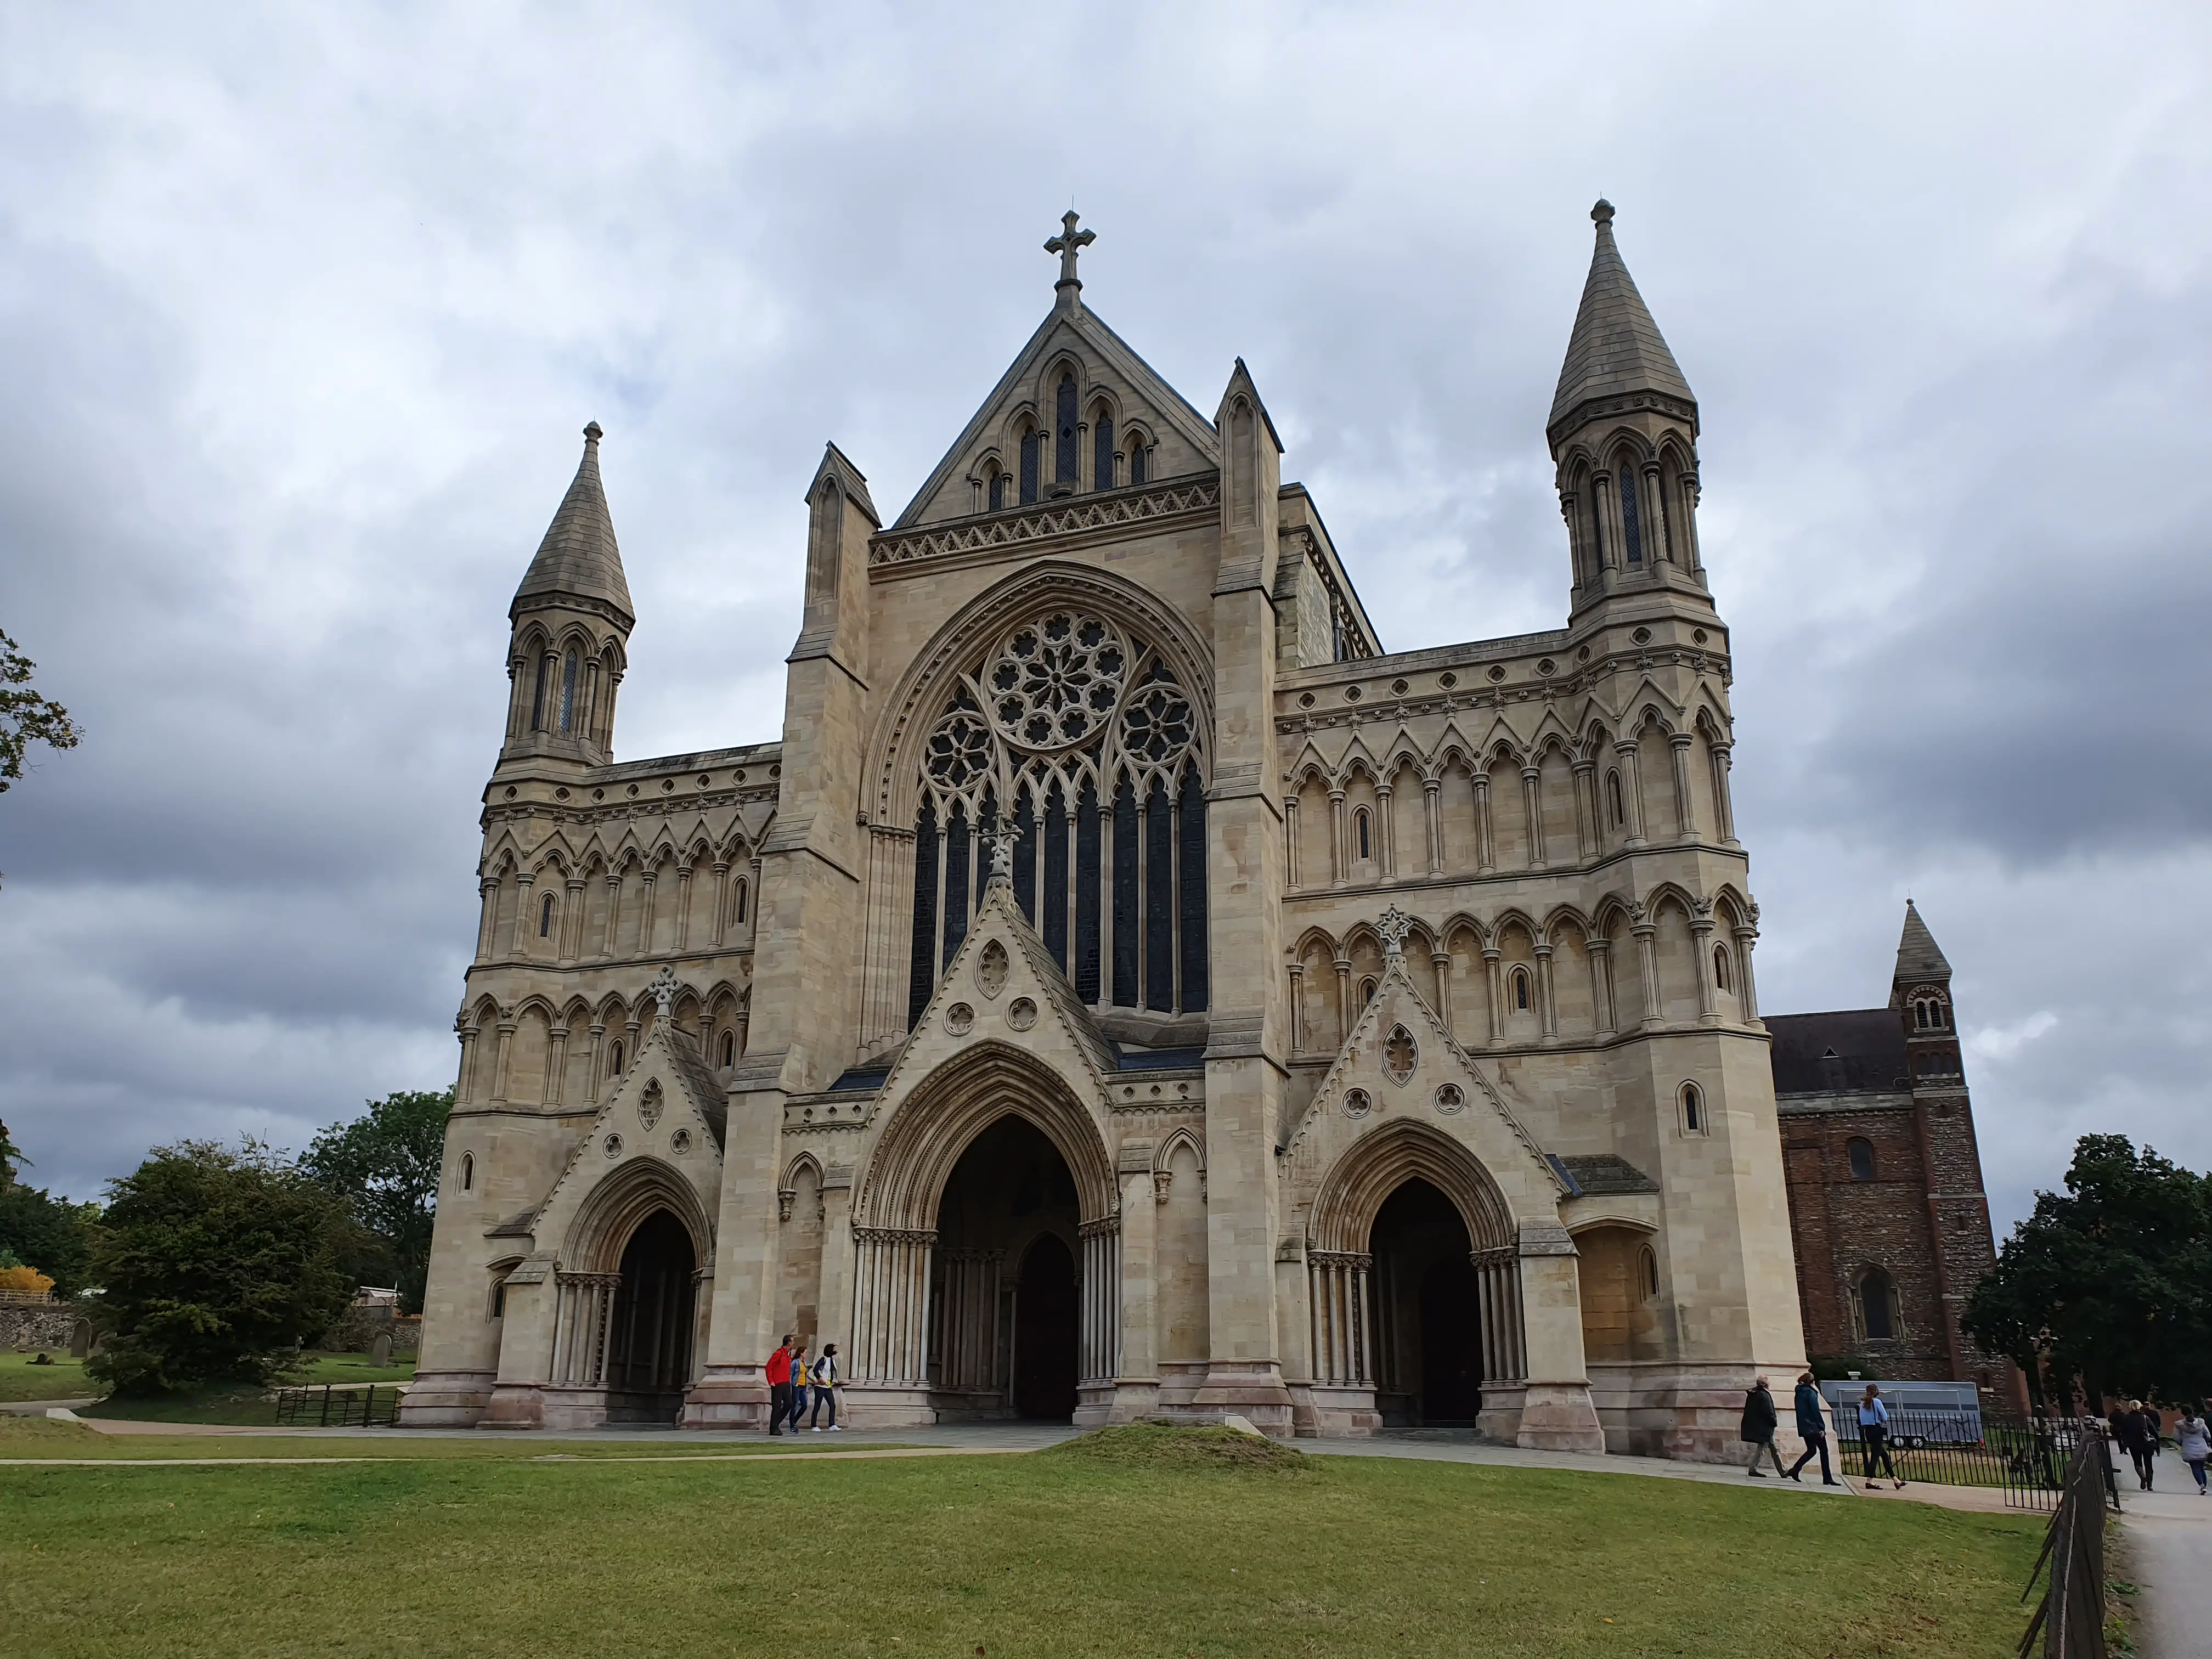 Things to do in St. Albans